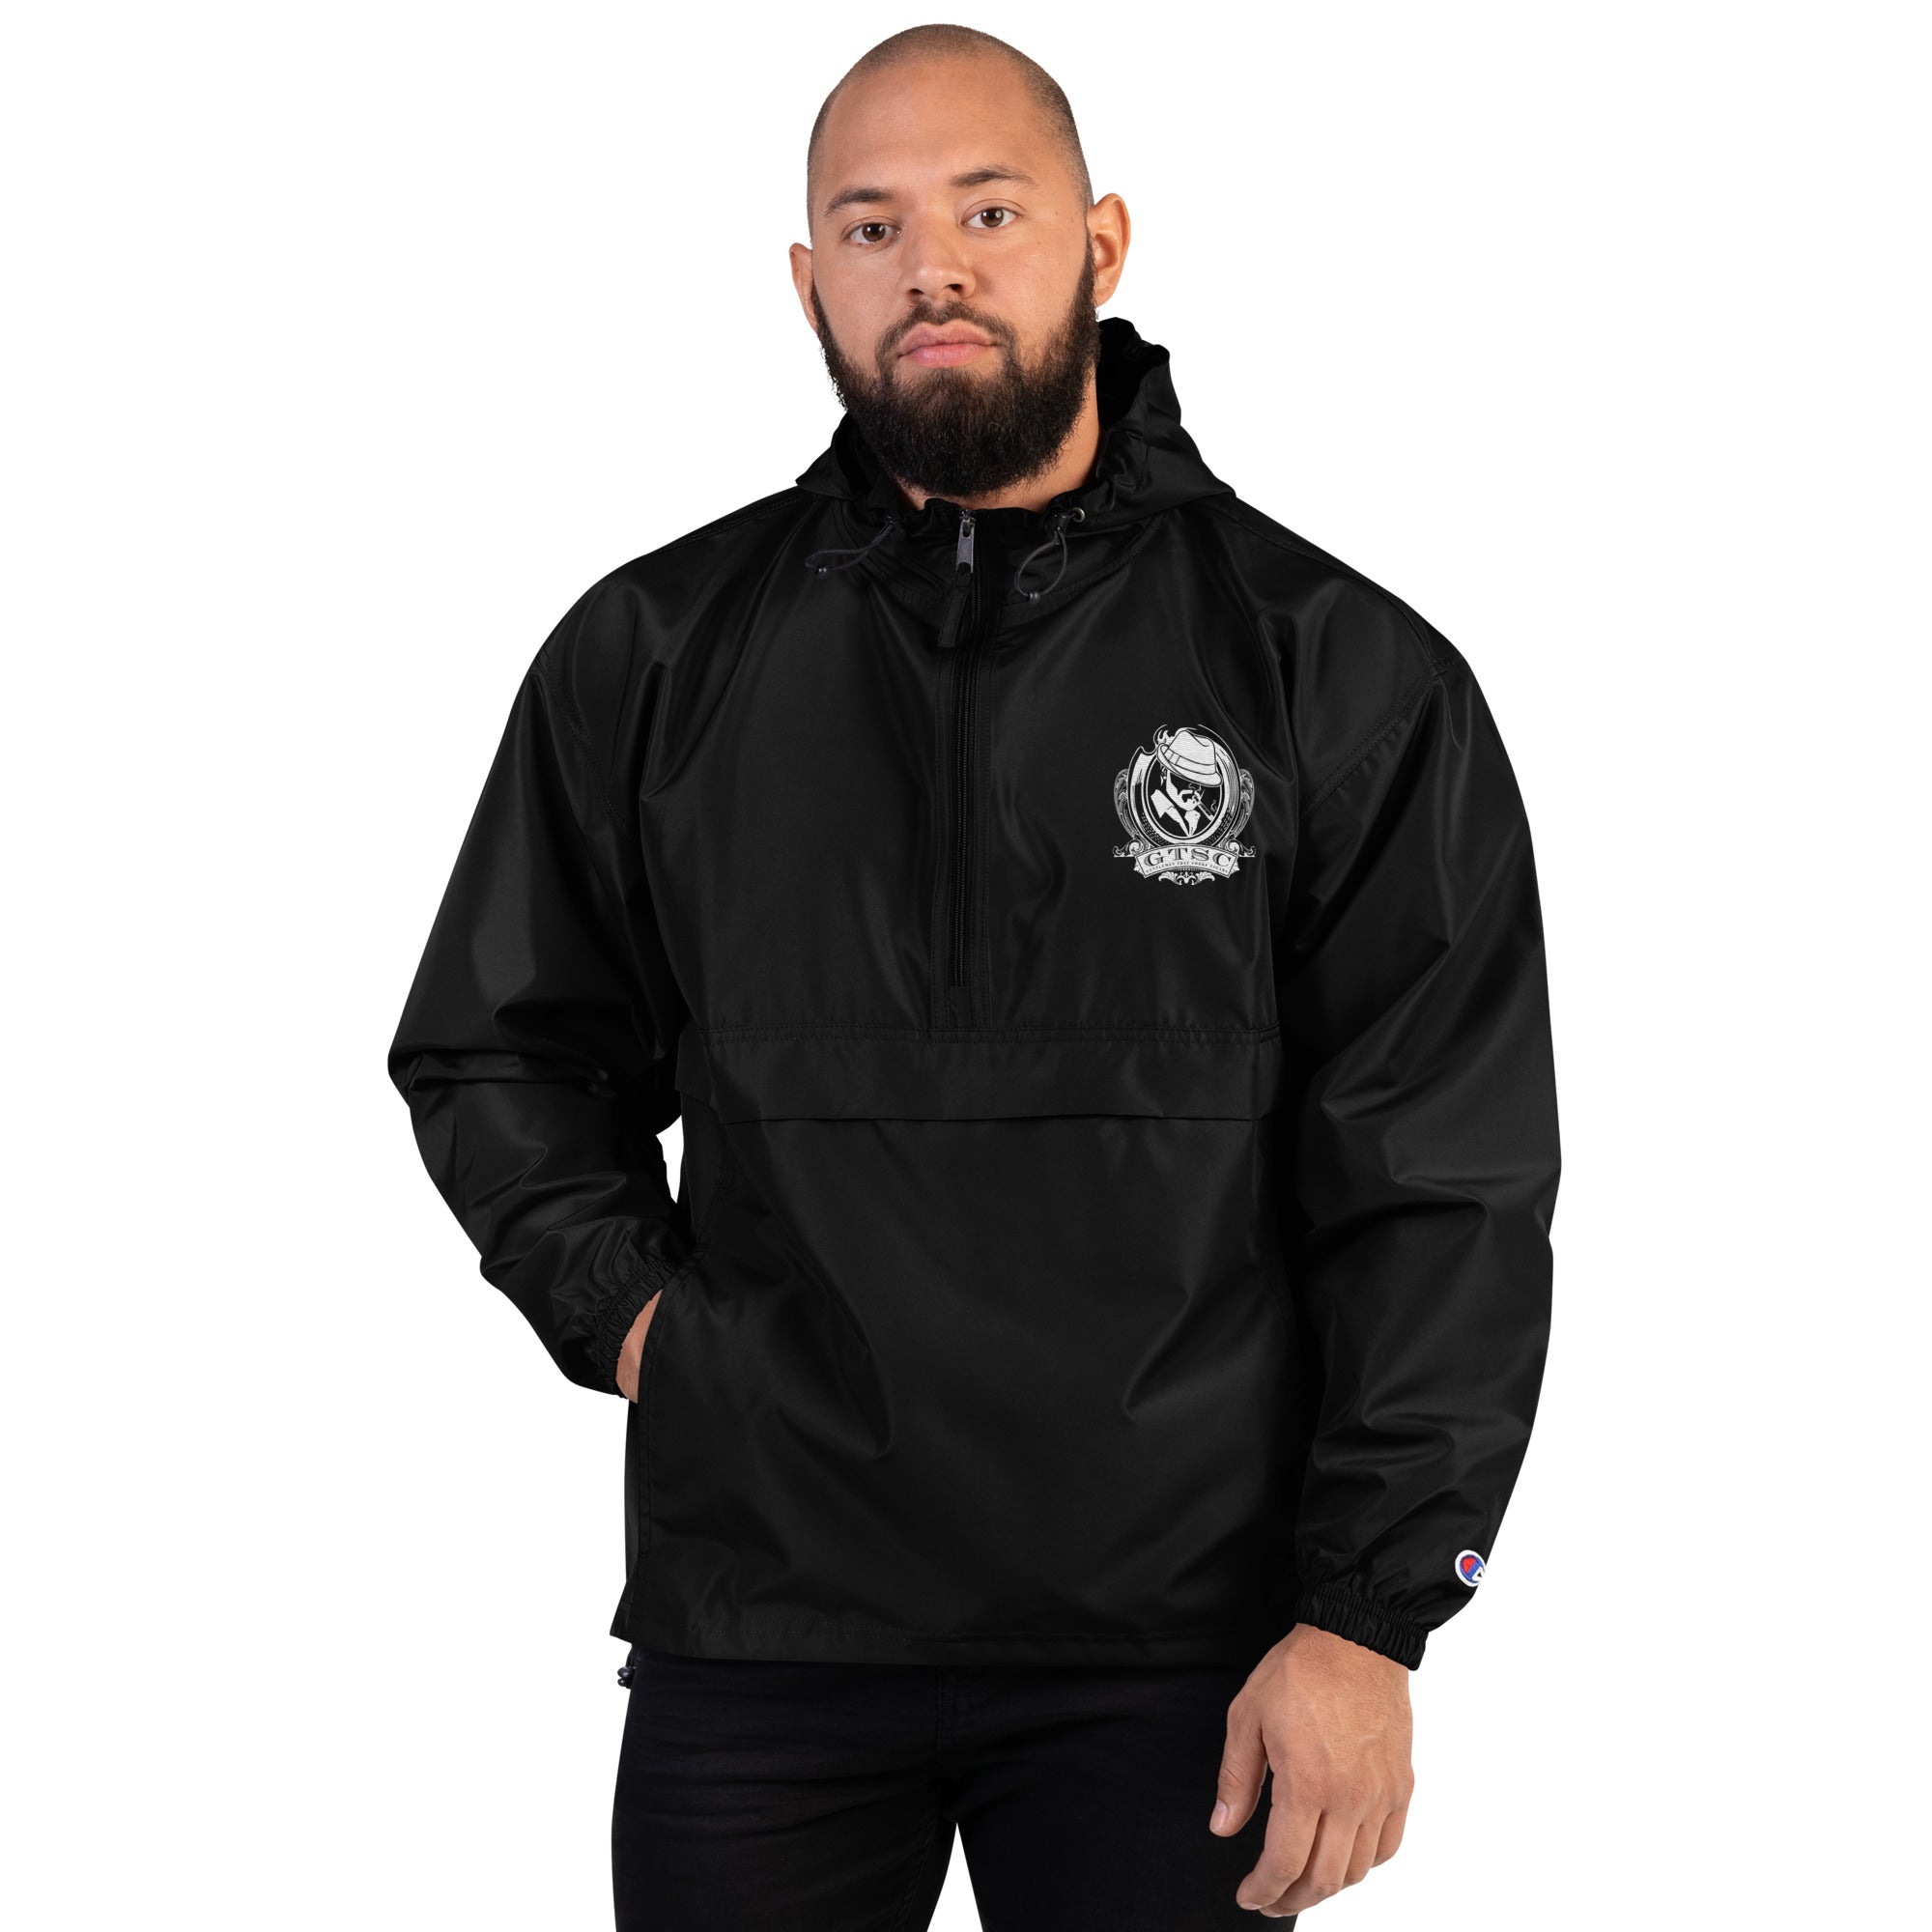 GTSC Embroidered  Packable Jacket